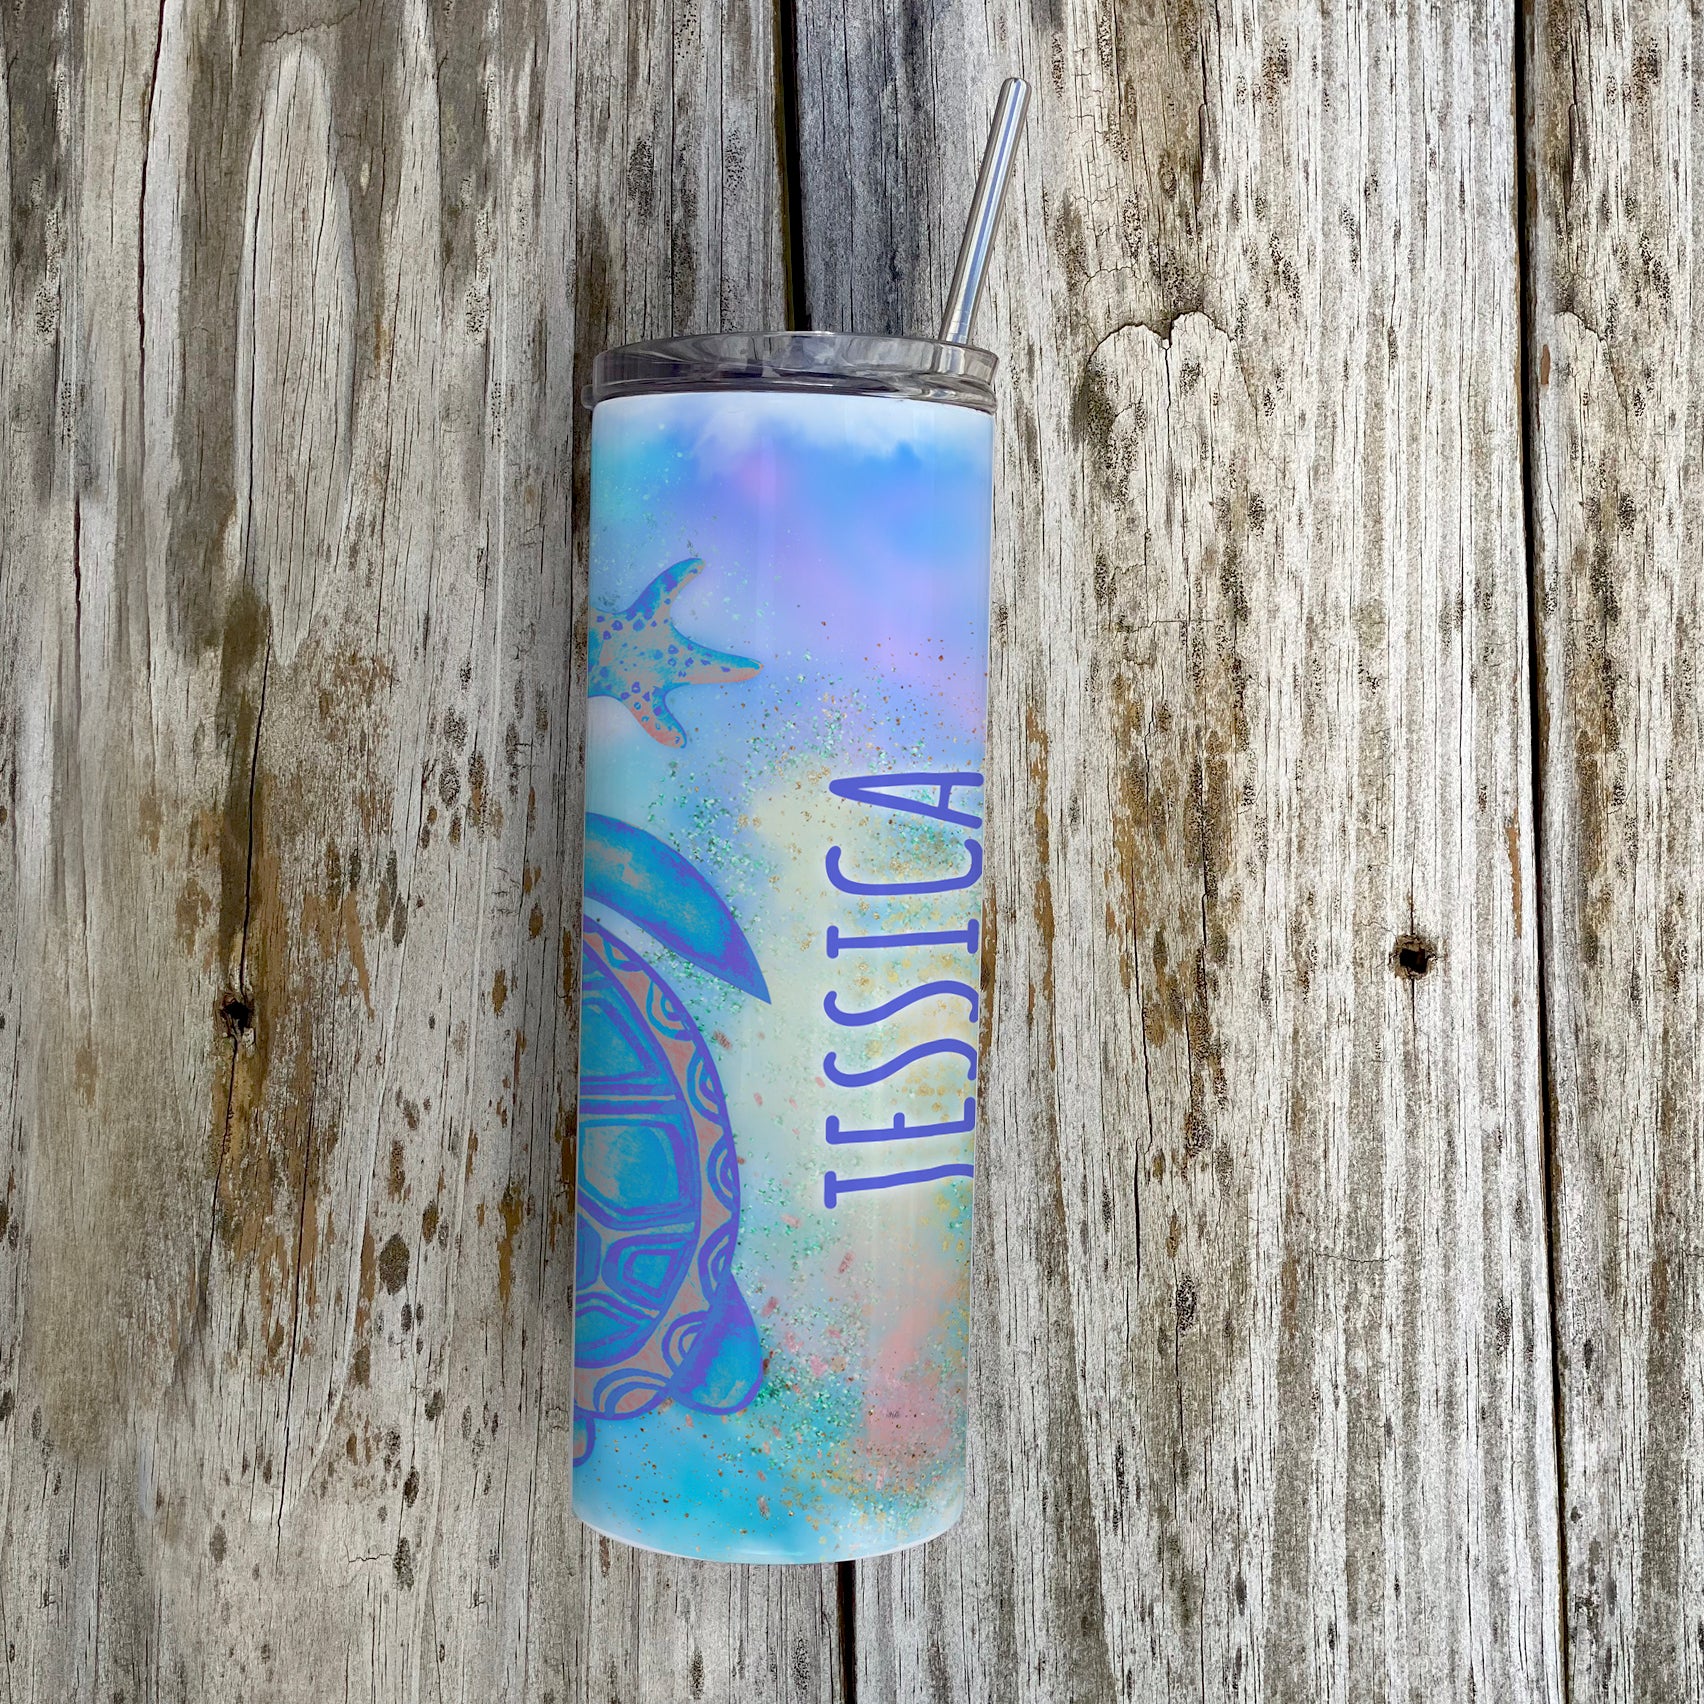 Trend Setters Originals (Sea Turtles - Personalized) 20 Oz Stainless Steel Travel Tumbler with Straw